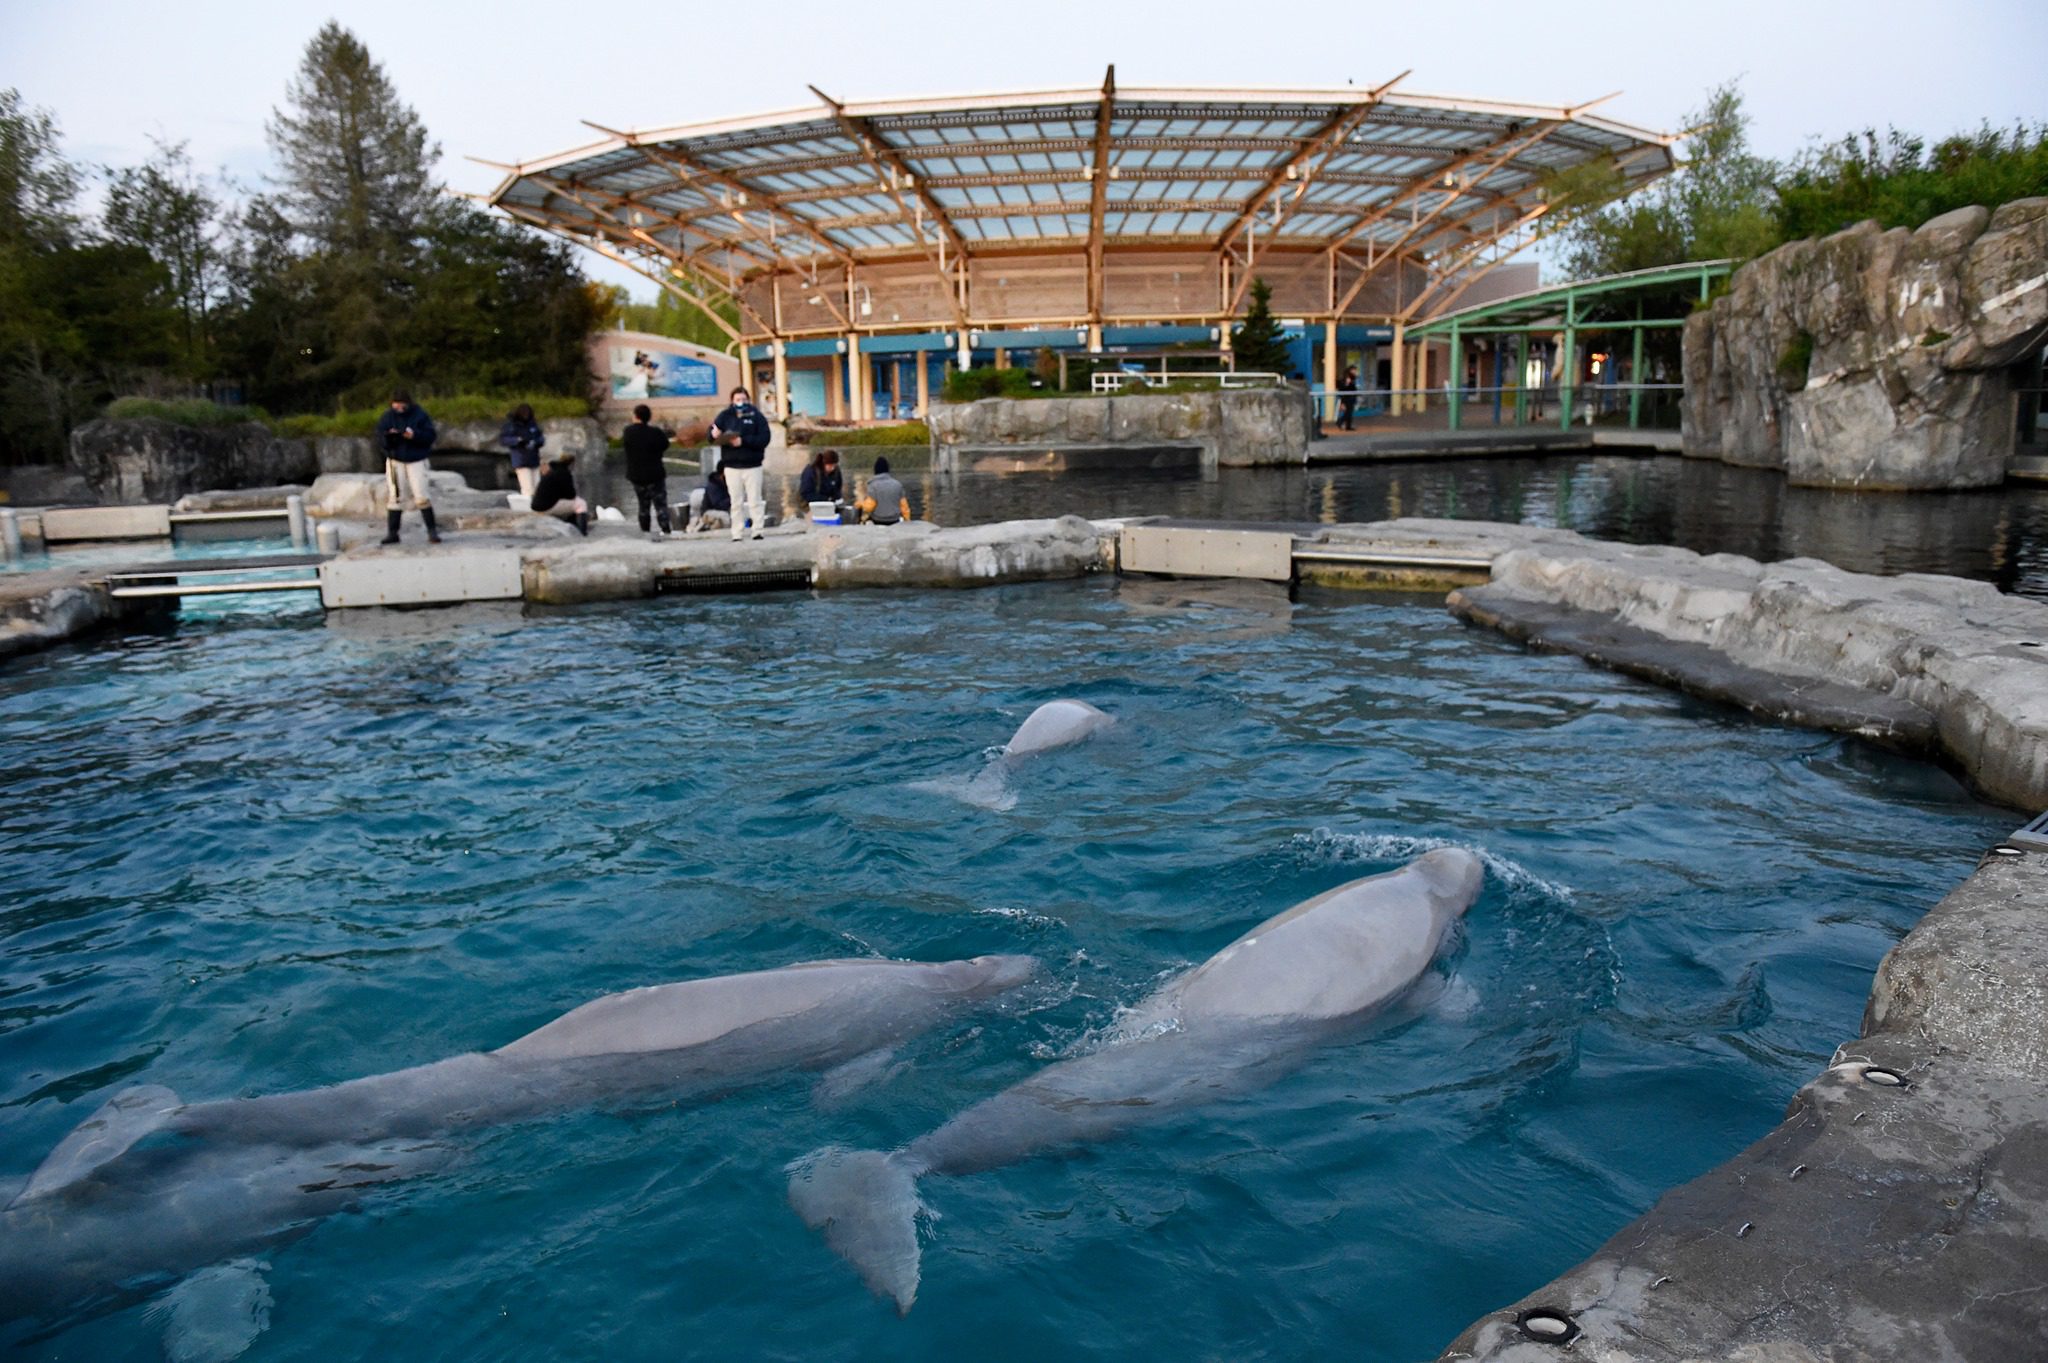 Get 25% off our dolphin & seal show tickets when you show your